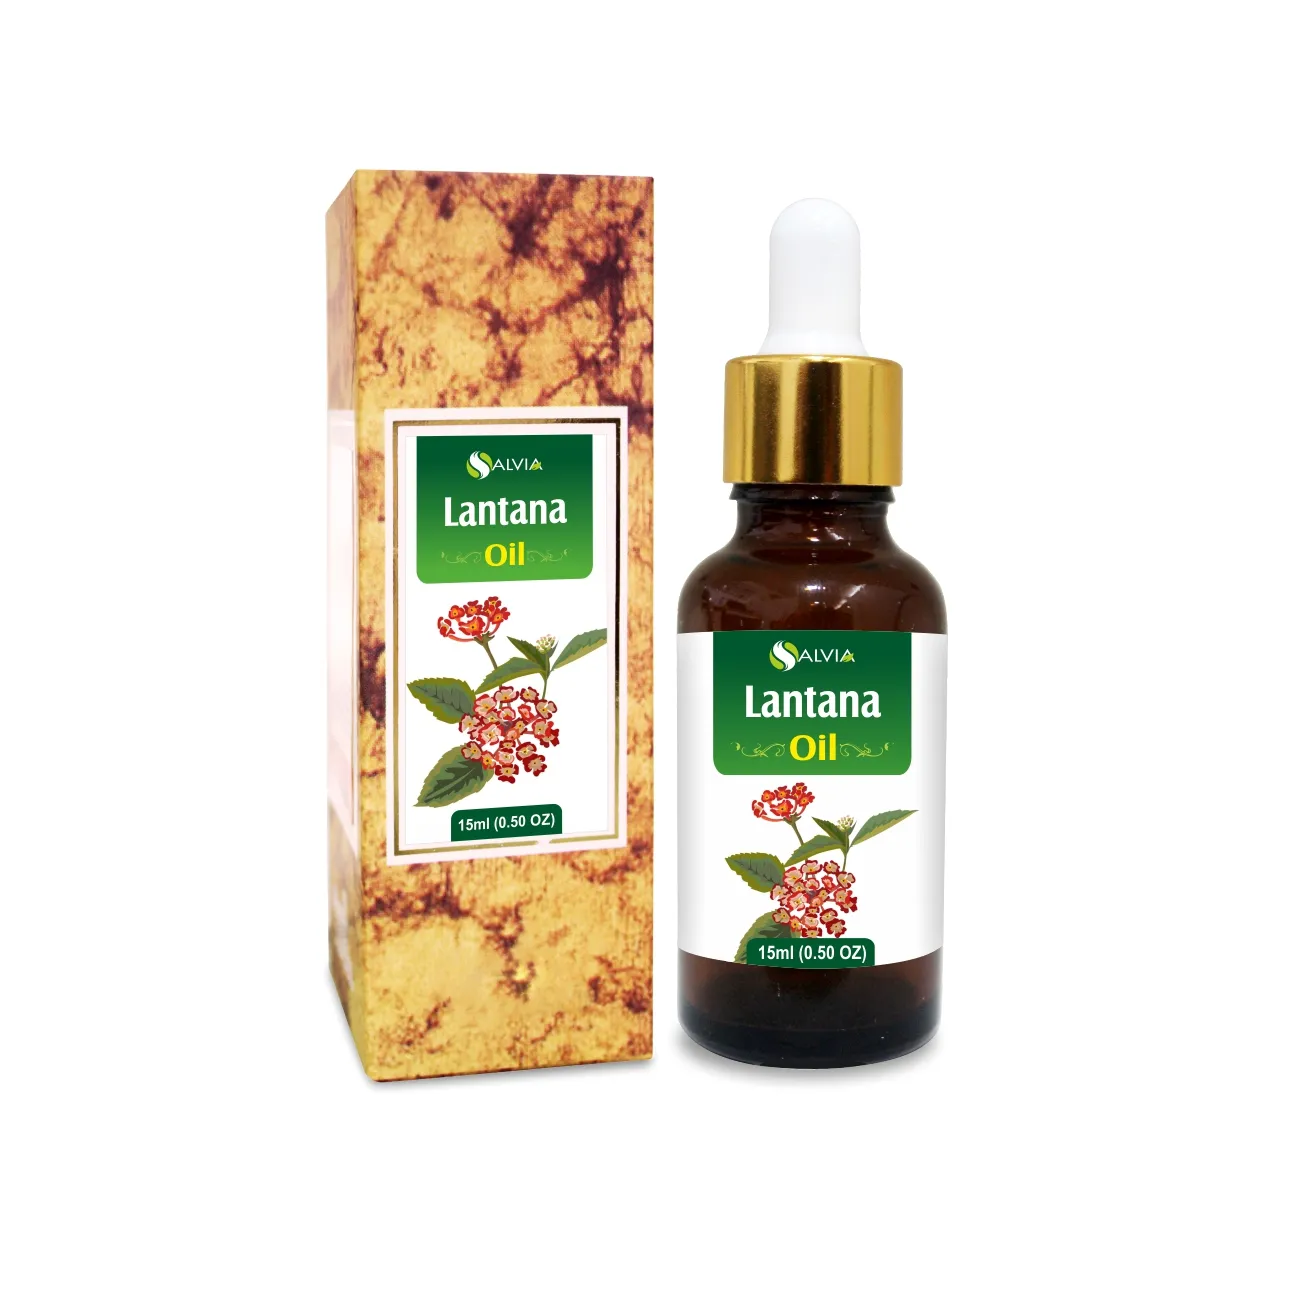 Salvia Lantana Oil Oil 100% Pure And Natural Lowest Price Customized Packaging Available